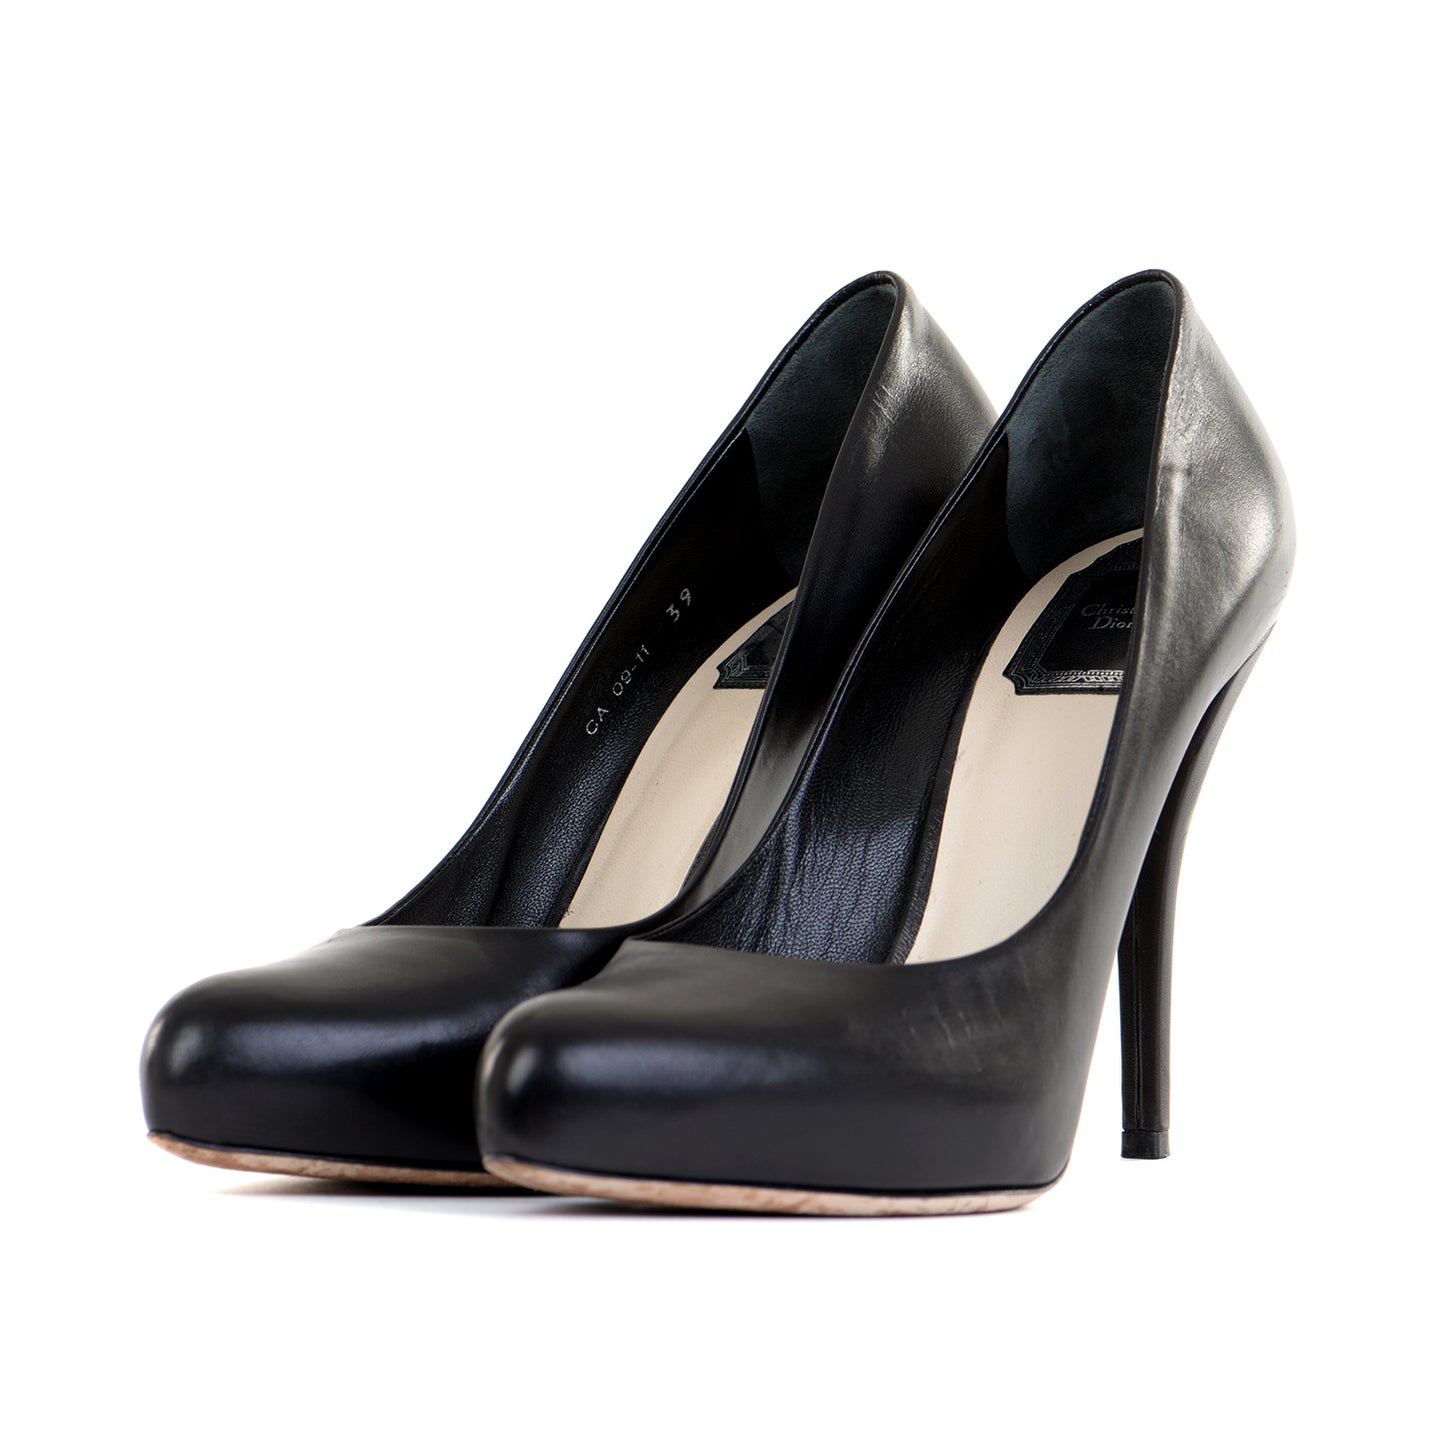 Black Leather Pointed Courts